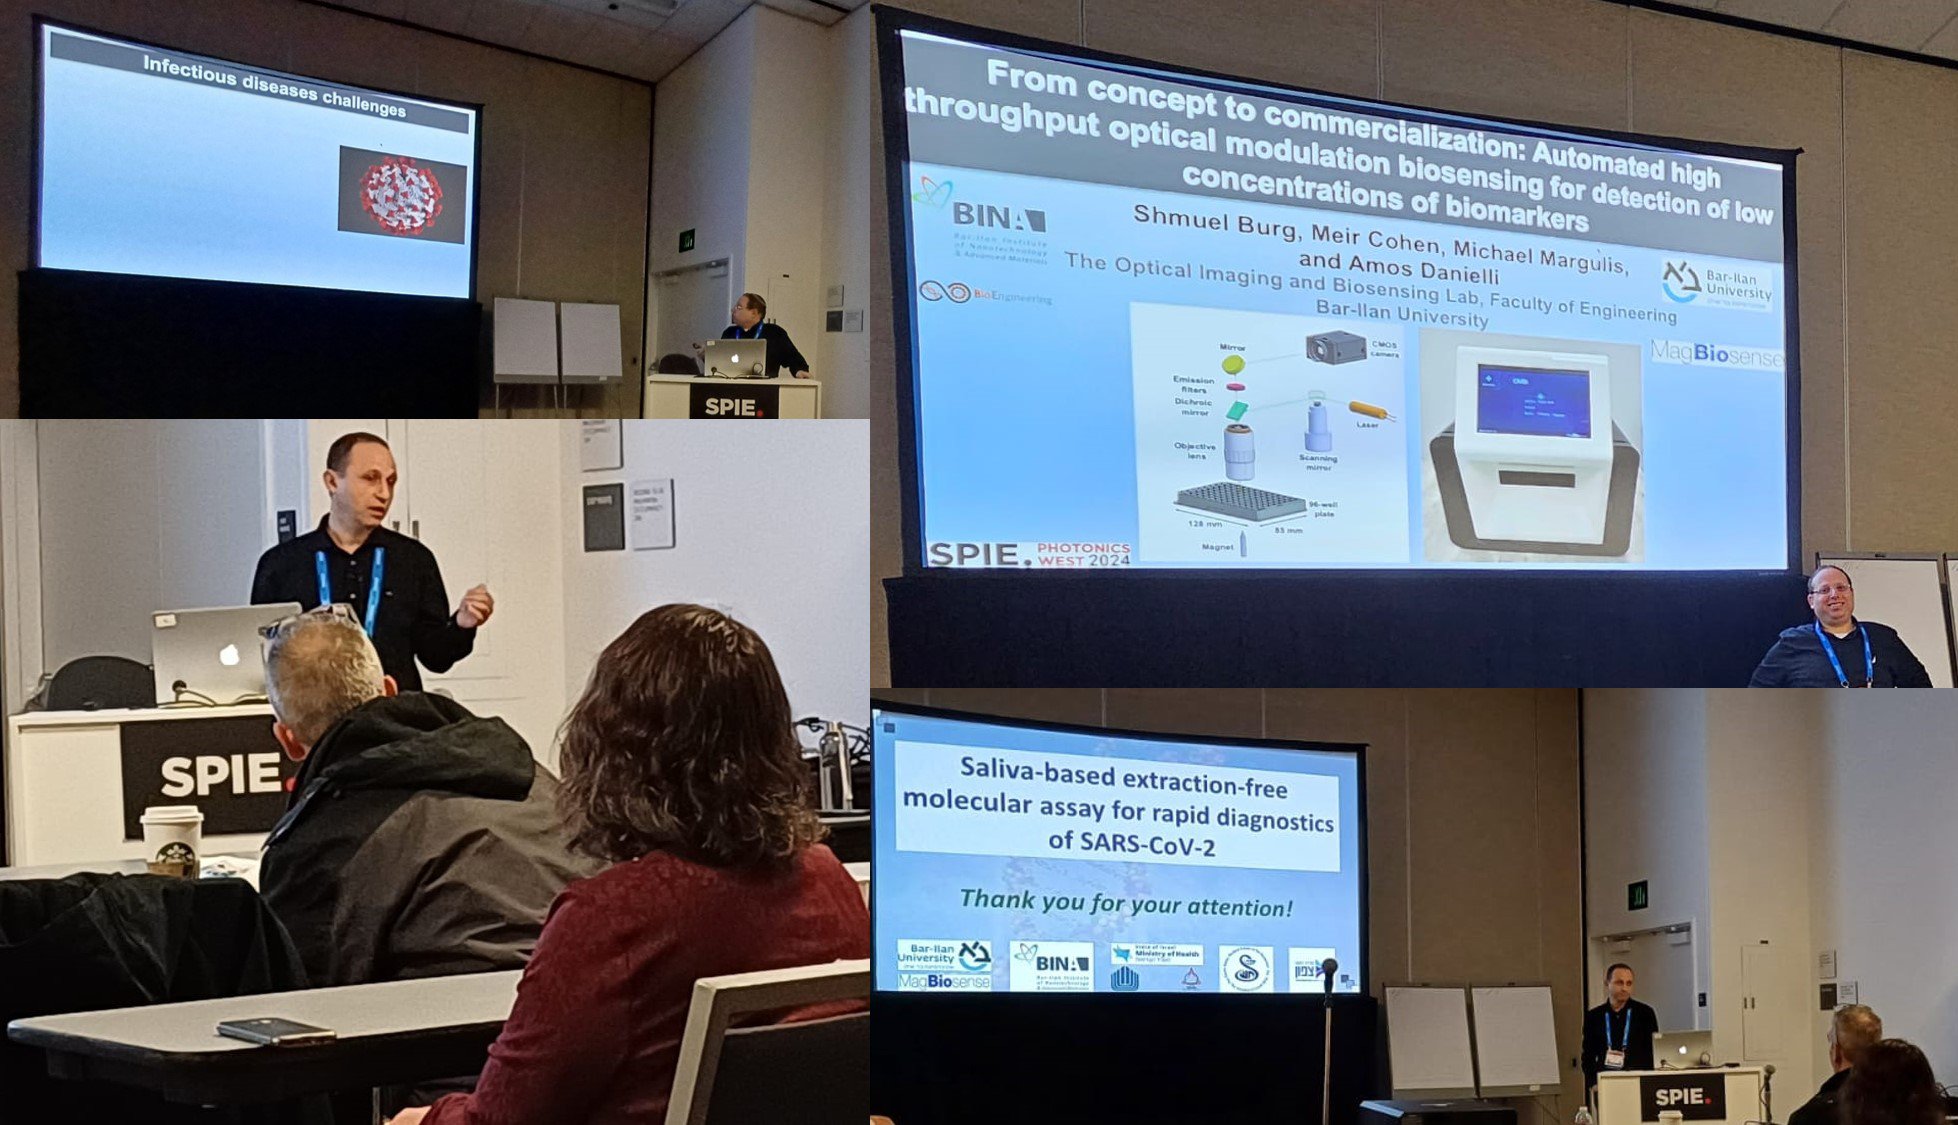 On January 29th, our Ph.D. student, Shmuel Burg, and our alumnus, Dr. Michael Margulis, presented their groundbreaking research at the Fluorescence II session of the BIOS conference during the SPIE Photonics West 2024 convention held in San Francisco, USA. Prof. Amos Danielli, our principal investigator, served as a joint chairman of the BIOS conference. 

In his lecture, Mr. Burg discussed the development from the initial concept to the final commercialization of an automated system with high throughput and high sensitivity for rapidly detecting low-concentration biomarkers. The technology, called high throughput optical modulation biosensing (ht-OMB), was developed in the Optical Imaging and Biosensing Laboratory. During the COVID-19 outbreak, the Israeli government signed a contract with MagBiosense company to develop a fully automatic system (OMBi). Shmuel collaborated with the company's engineers to build the OMBi system, which can also detect other pathogens. The OMBi system was tested with swab samples of 236 healthy individuals and 70 SARS-Cov-2 confirmed patients, showing 100% specificity and 95% sensitivity. 

Dr. Margulis gave a lecture where he introduced a new molecular biological test for detecting SARS-CoV-2 using an innovative saliva-based sampling technique. The assay is highly sensitive and takes only 50 minutes, compared to the conventional methods that take 2-3 hours. Additionally, the saliva-based sampling method is less invasive and more accurate than the swab. During the COVID-19 outbreak, a pilot of the method was conducted in collaboration with the Ministry of Health, and a total of 364 people were sampled using both methods. The OMBi results showed that the saliva method had a 95% specificity and 90% sensitivity.